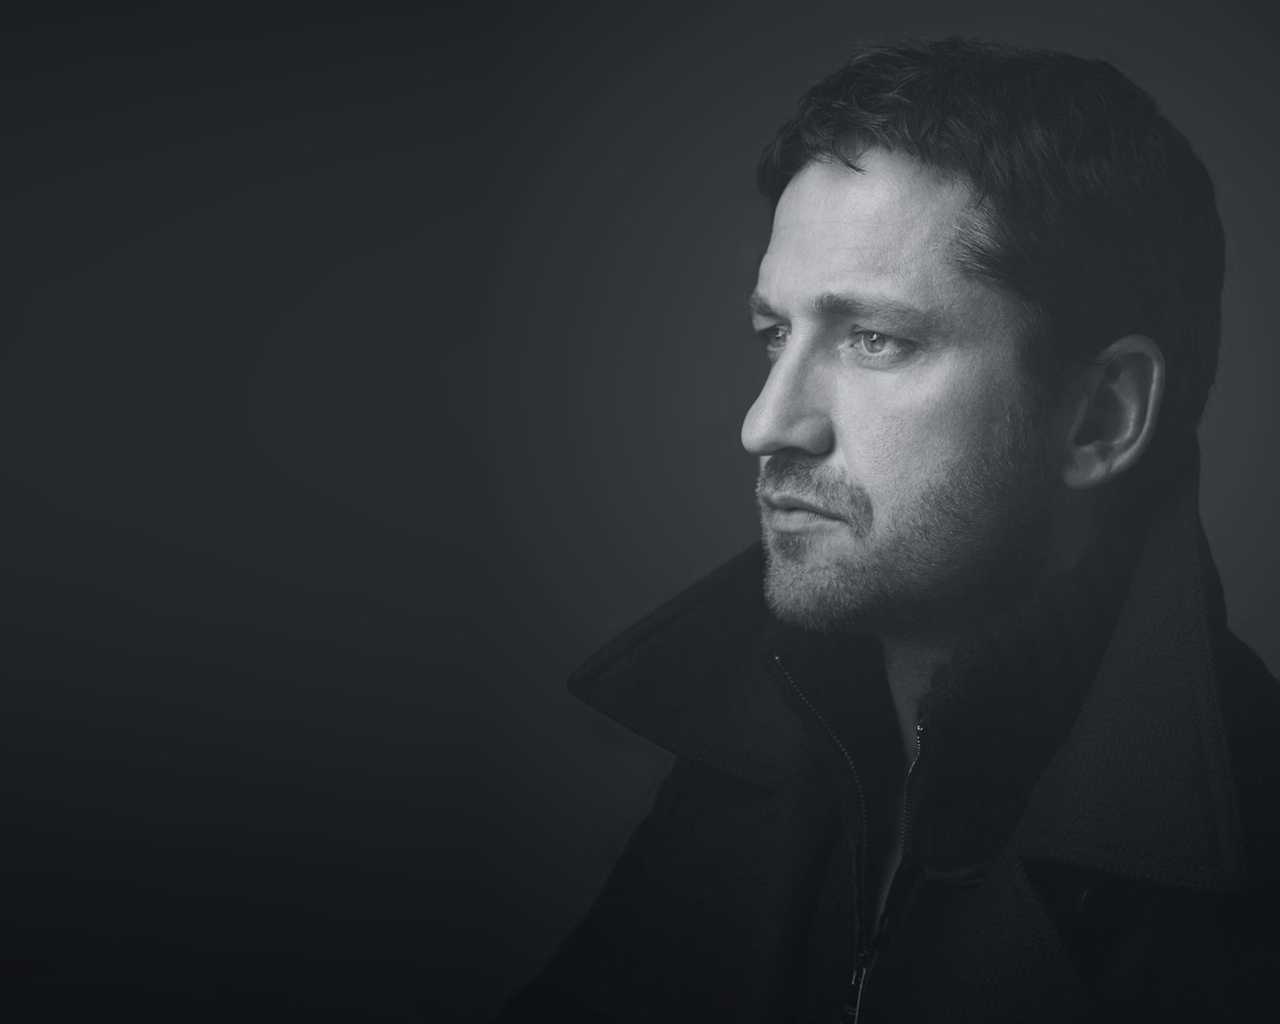 Thoughtful Gerard Butler for 1280 x 1024 resolution